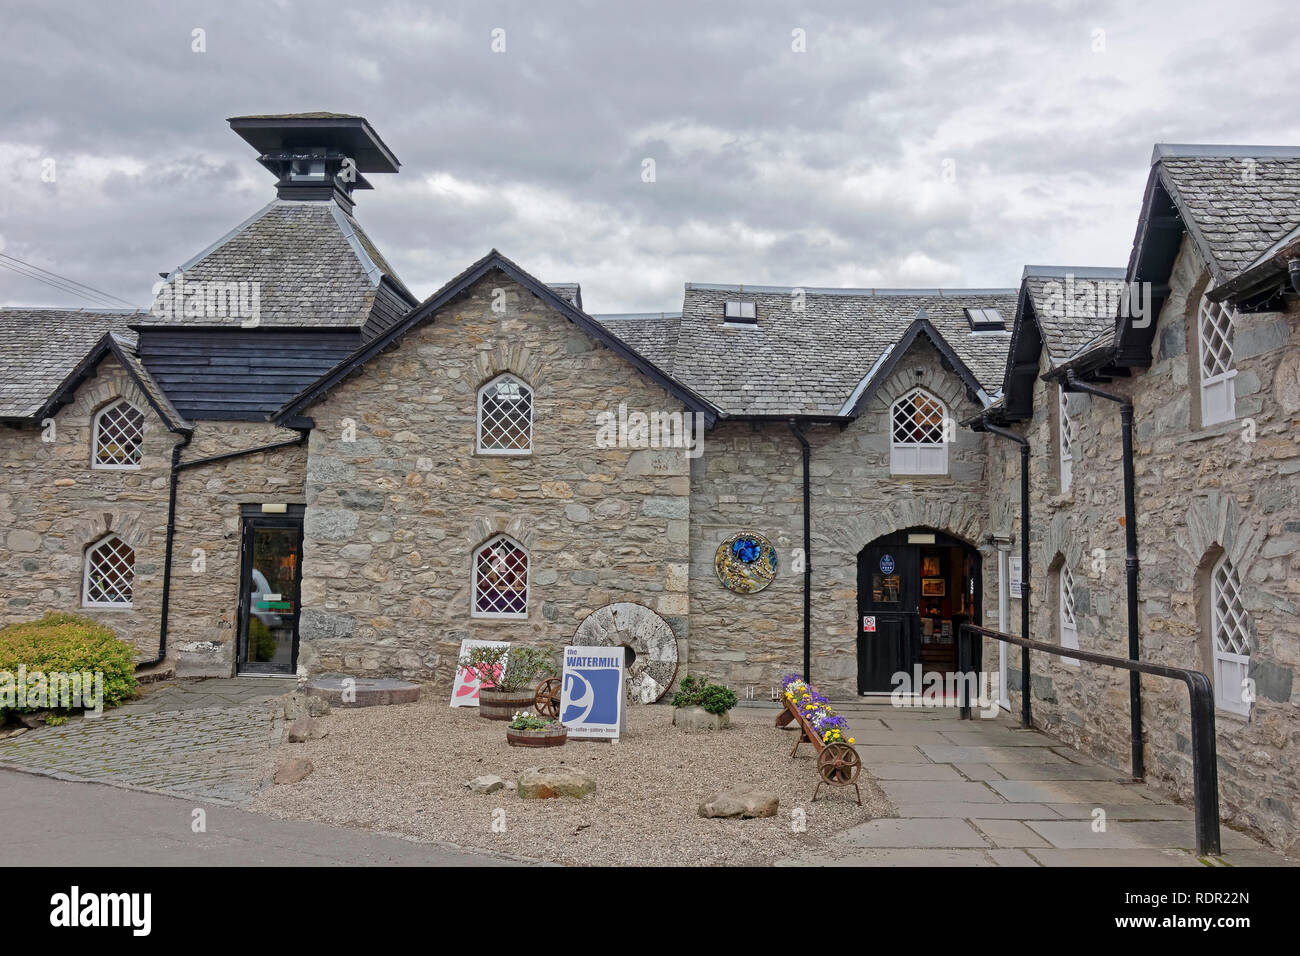 The Watermill Bookshop, Cafe and Gallery in Aberfeldy, Perthshire, Scotland, UK Stock Photo